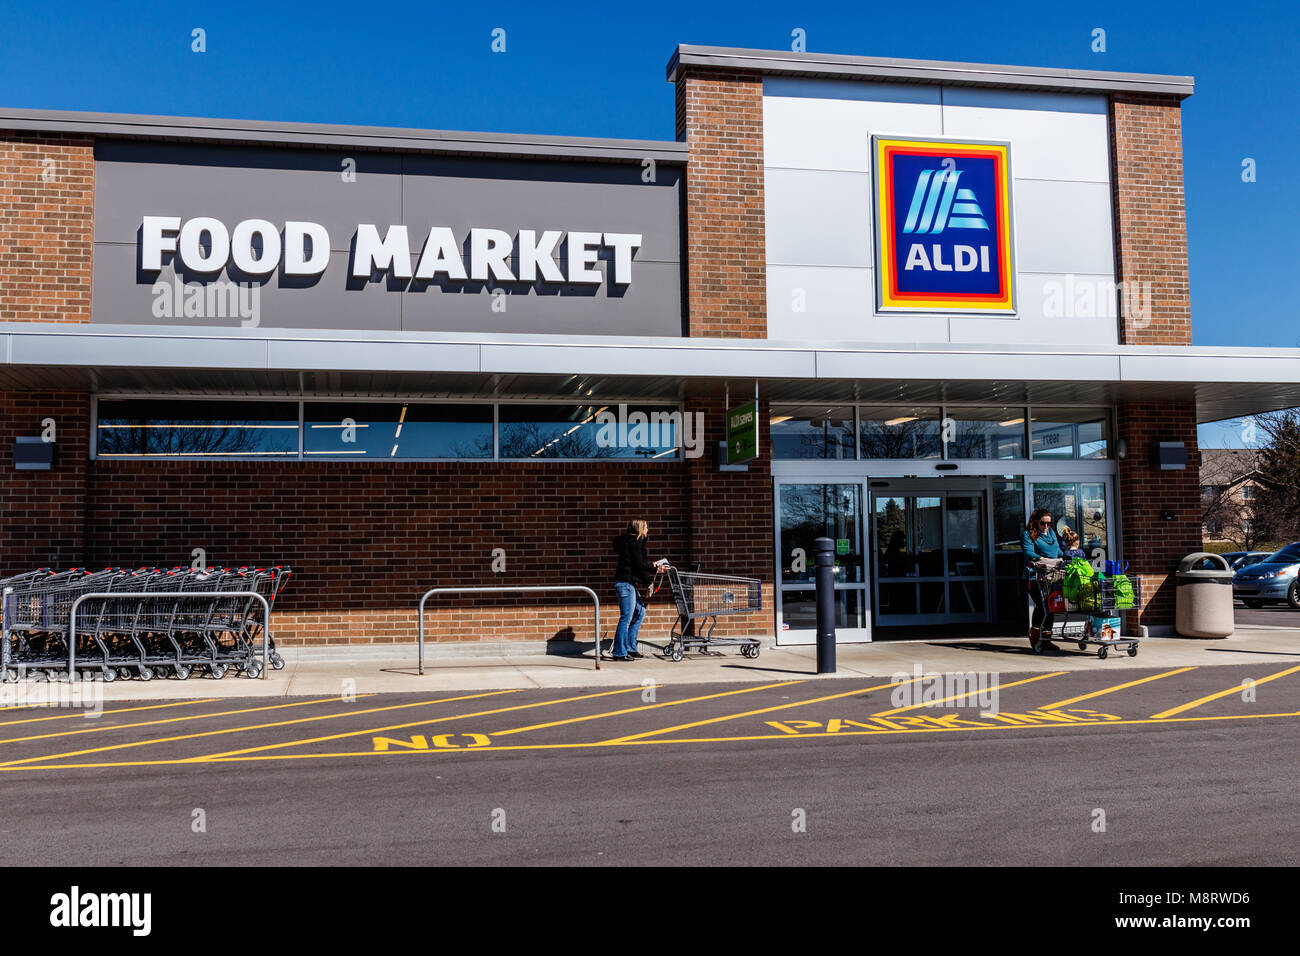 Noblesville - Circa March 2018: Aldi Discount Supermarket. Aldi sells a range of grocery items, including produce, meat & dairy, at discount prices I Stock Photo